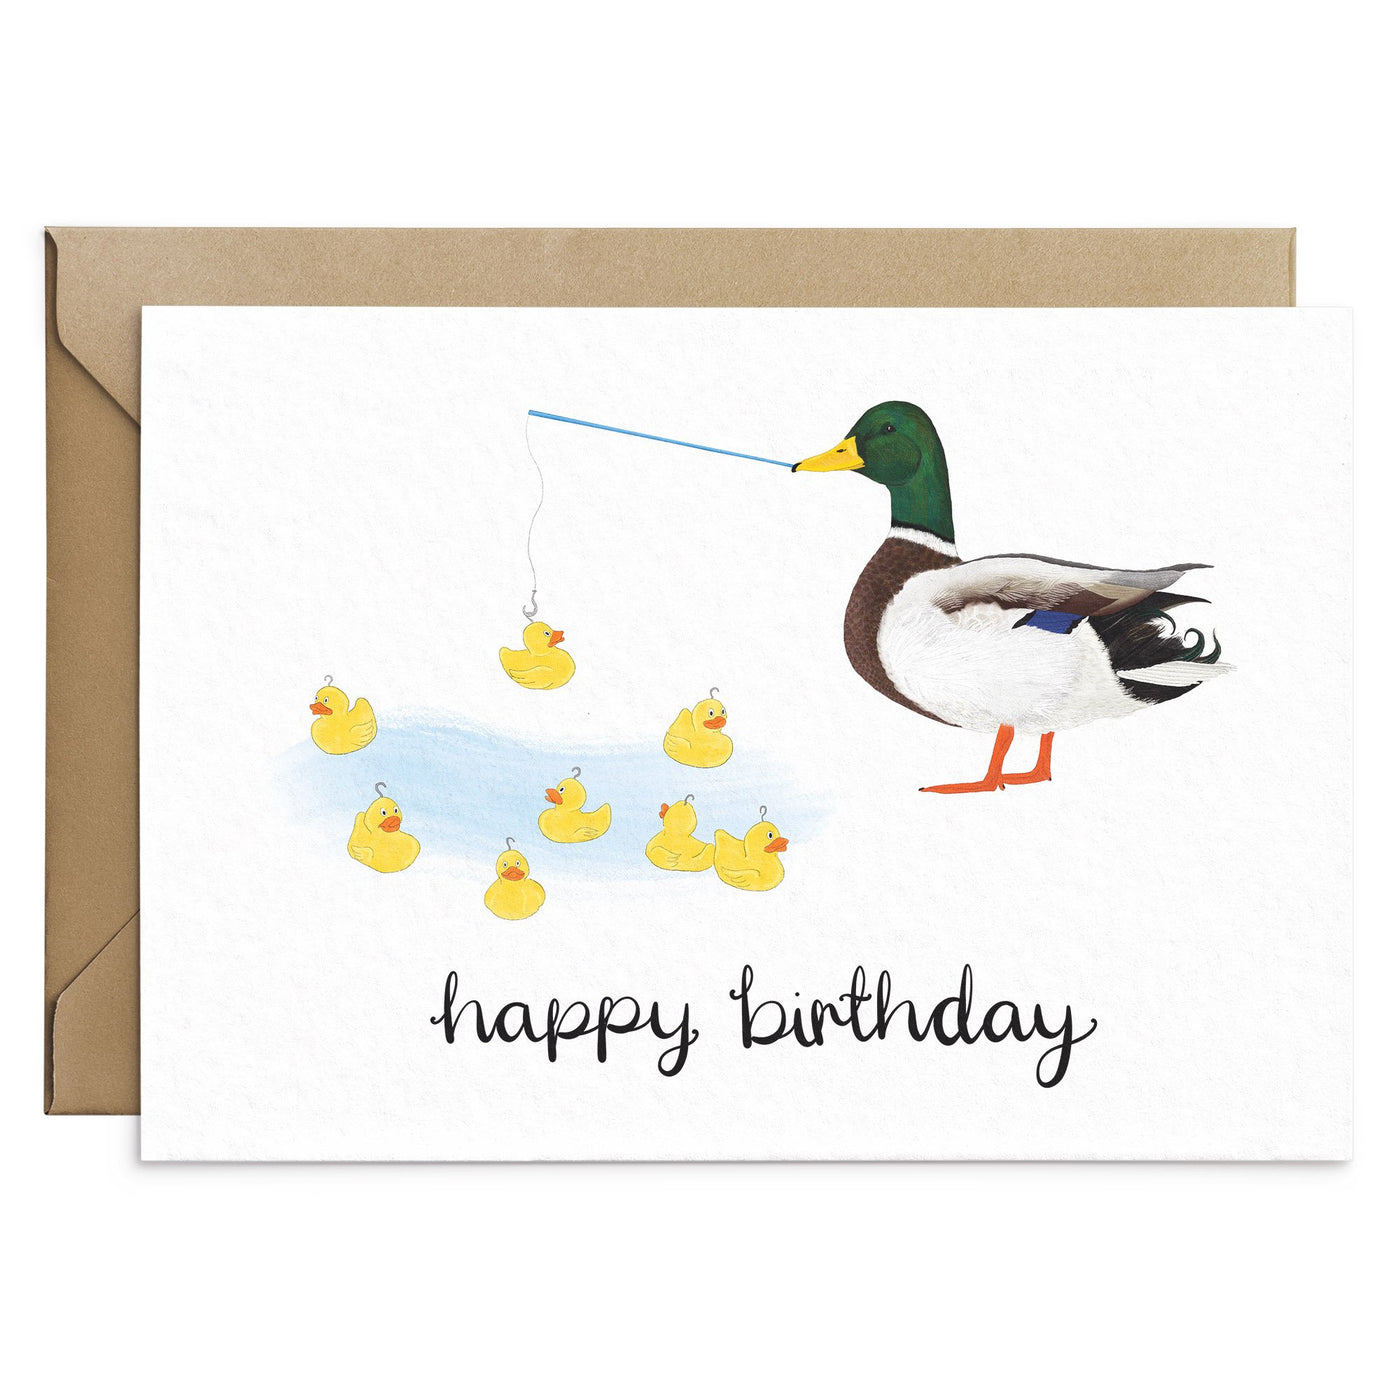 Funny Duck Birthday Card - Poppins & Co.